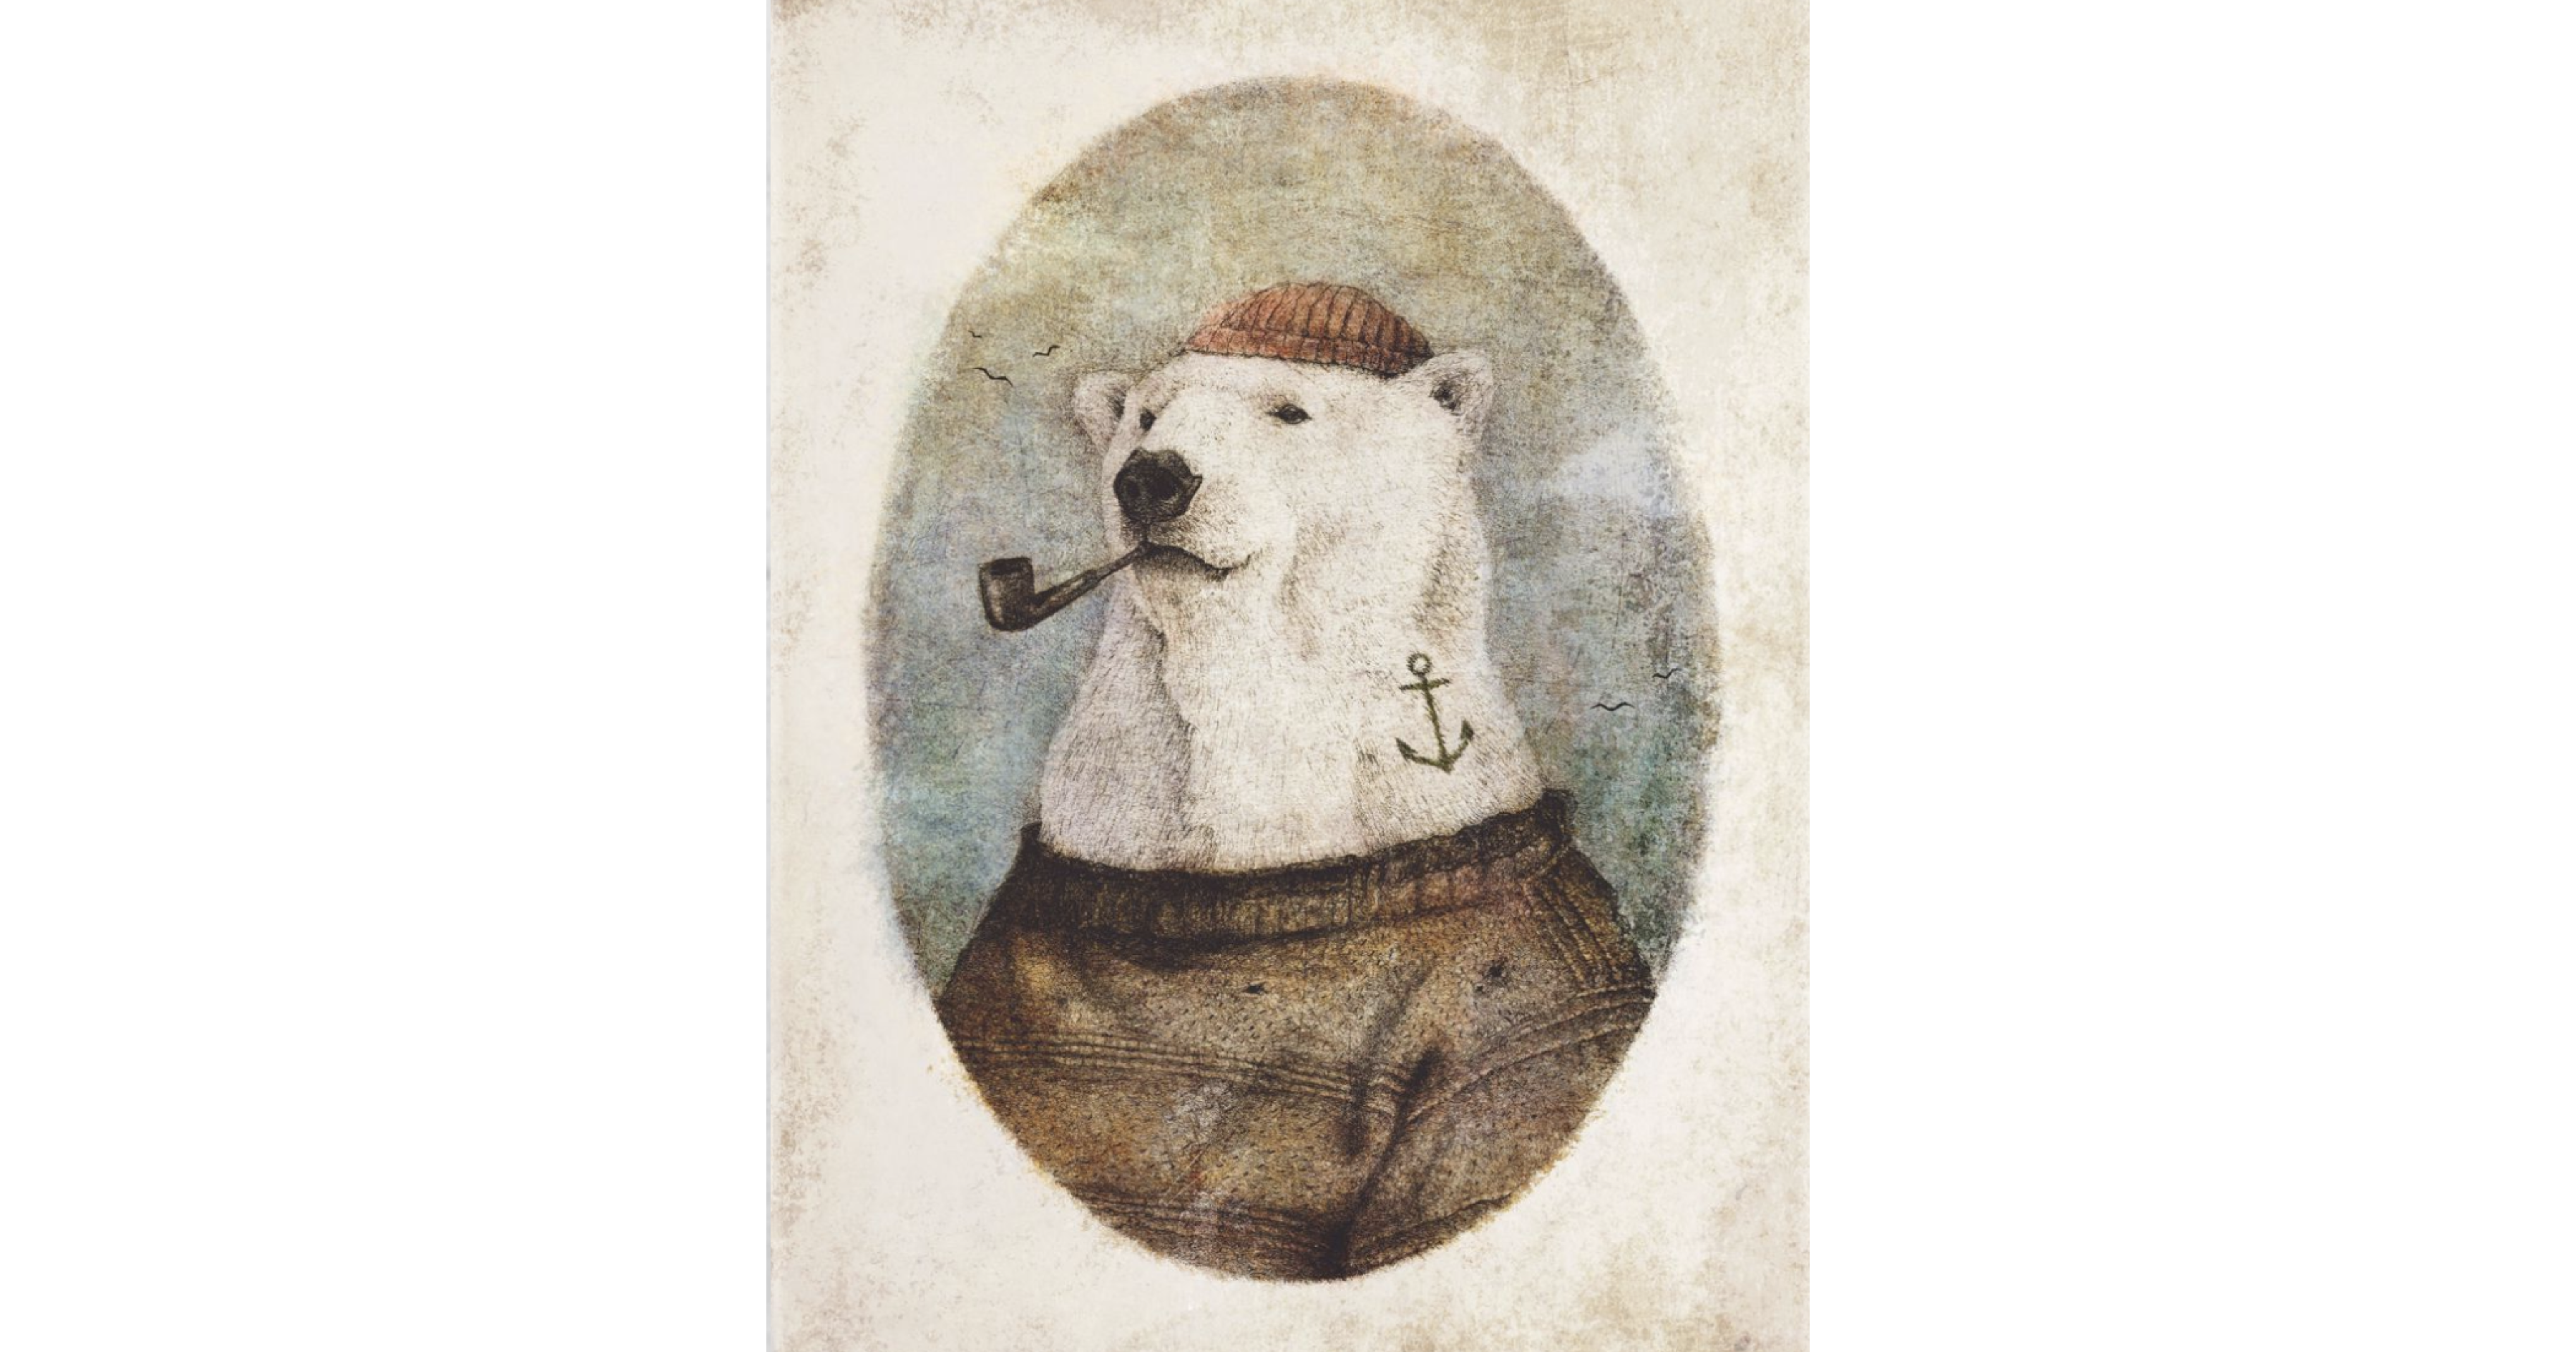 Polar bear wearing a shirt and knit hat with a pipe in its mouth and an anchor tattoo on its neck